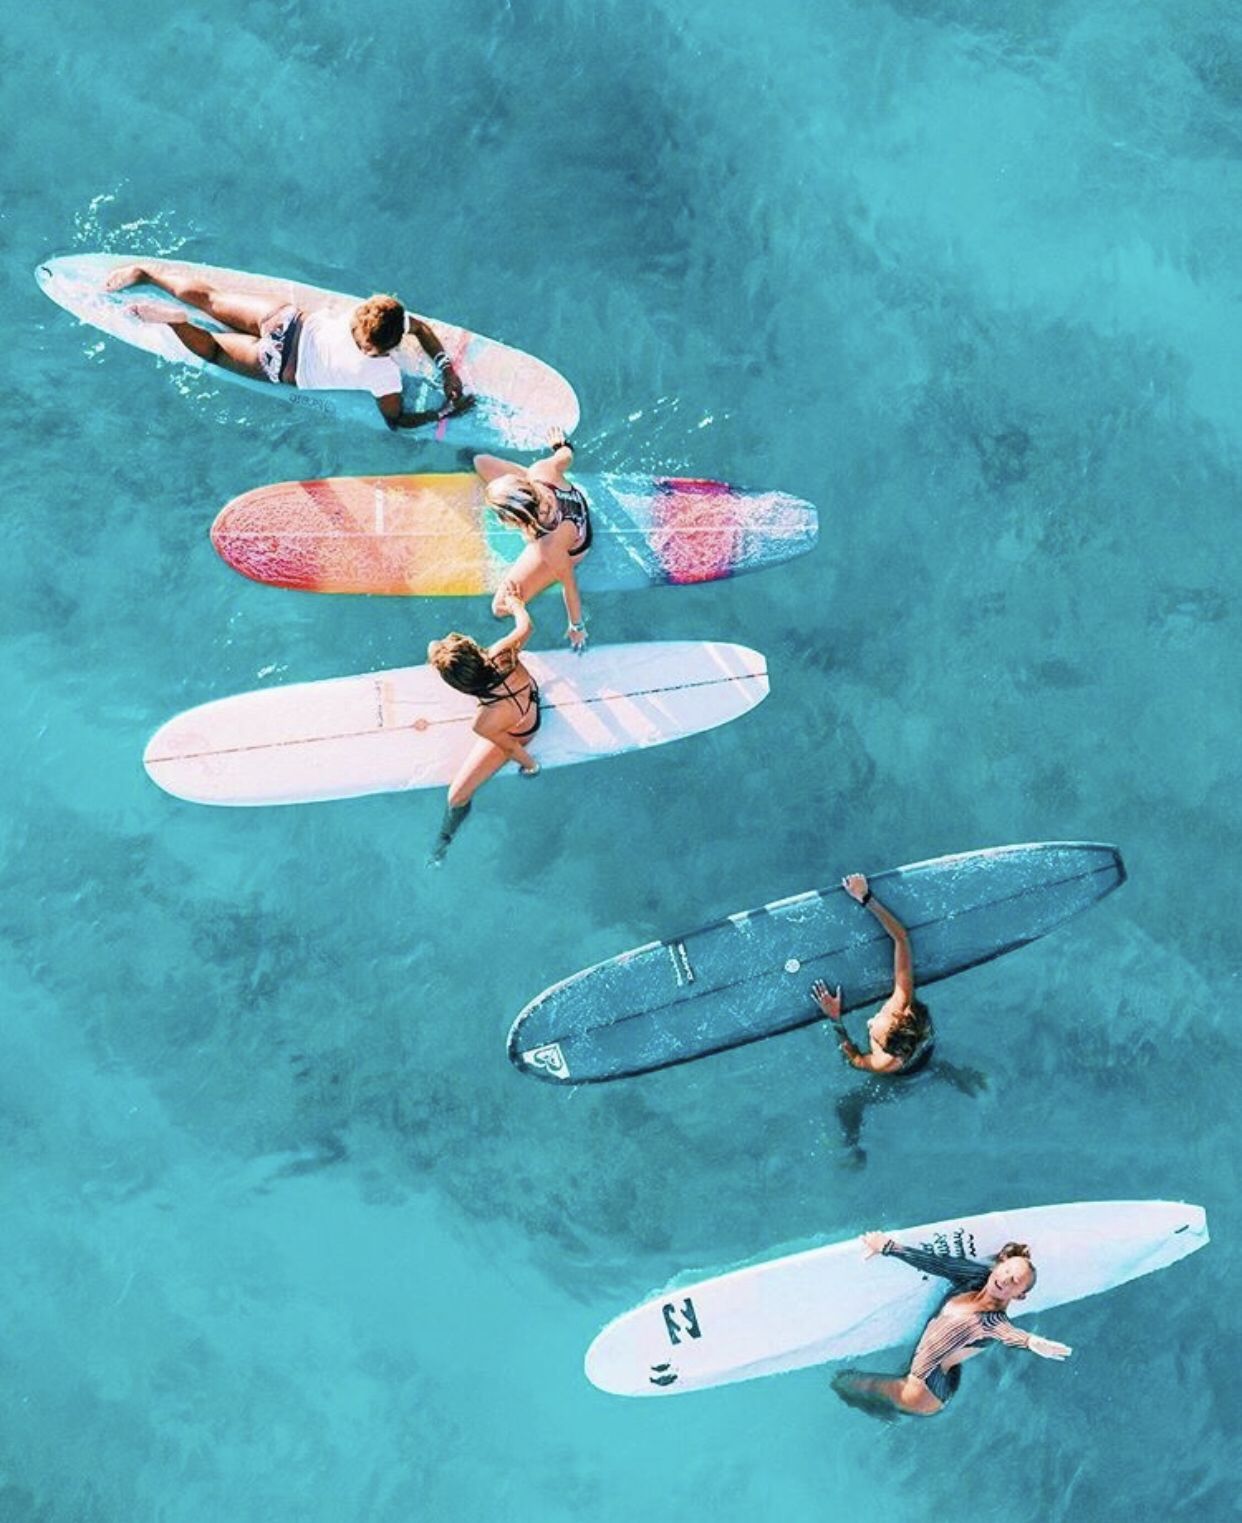 Friends surfing together. #surfers #surfing #surf #bluewater #photography #travel #bucketlist. Surfing, Summer aesthetic, Surfing photography